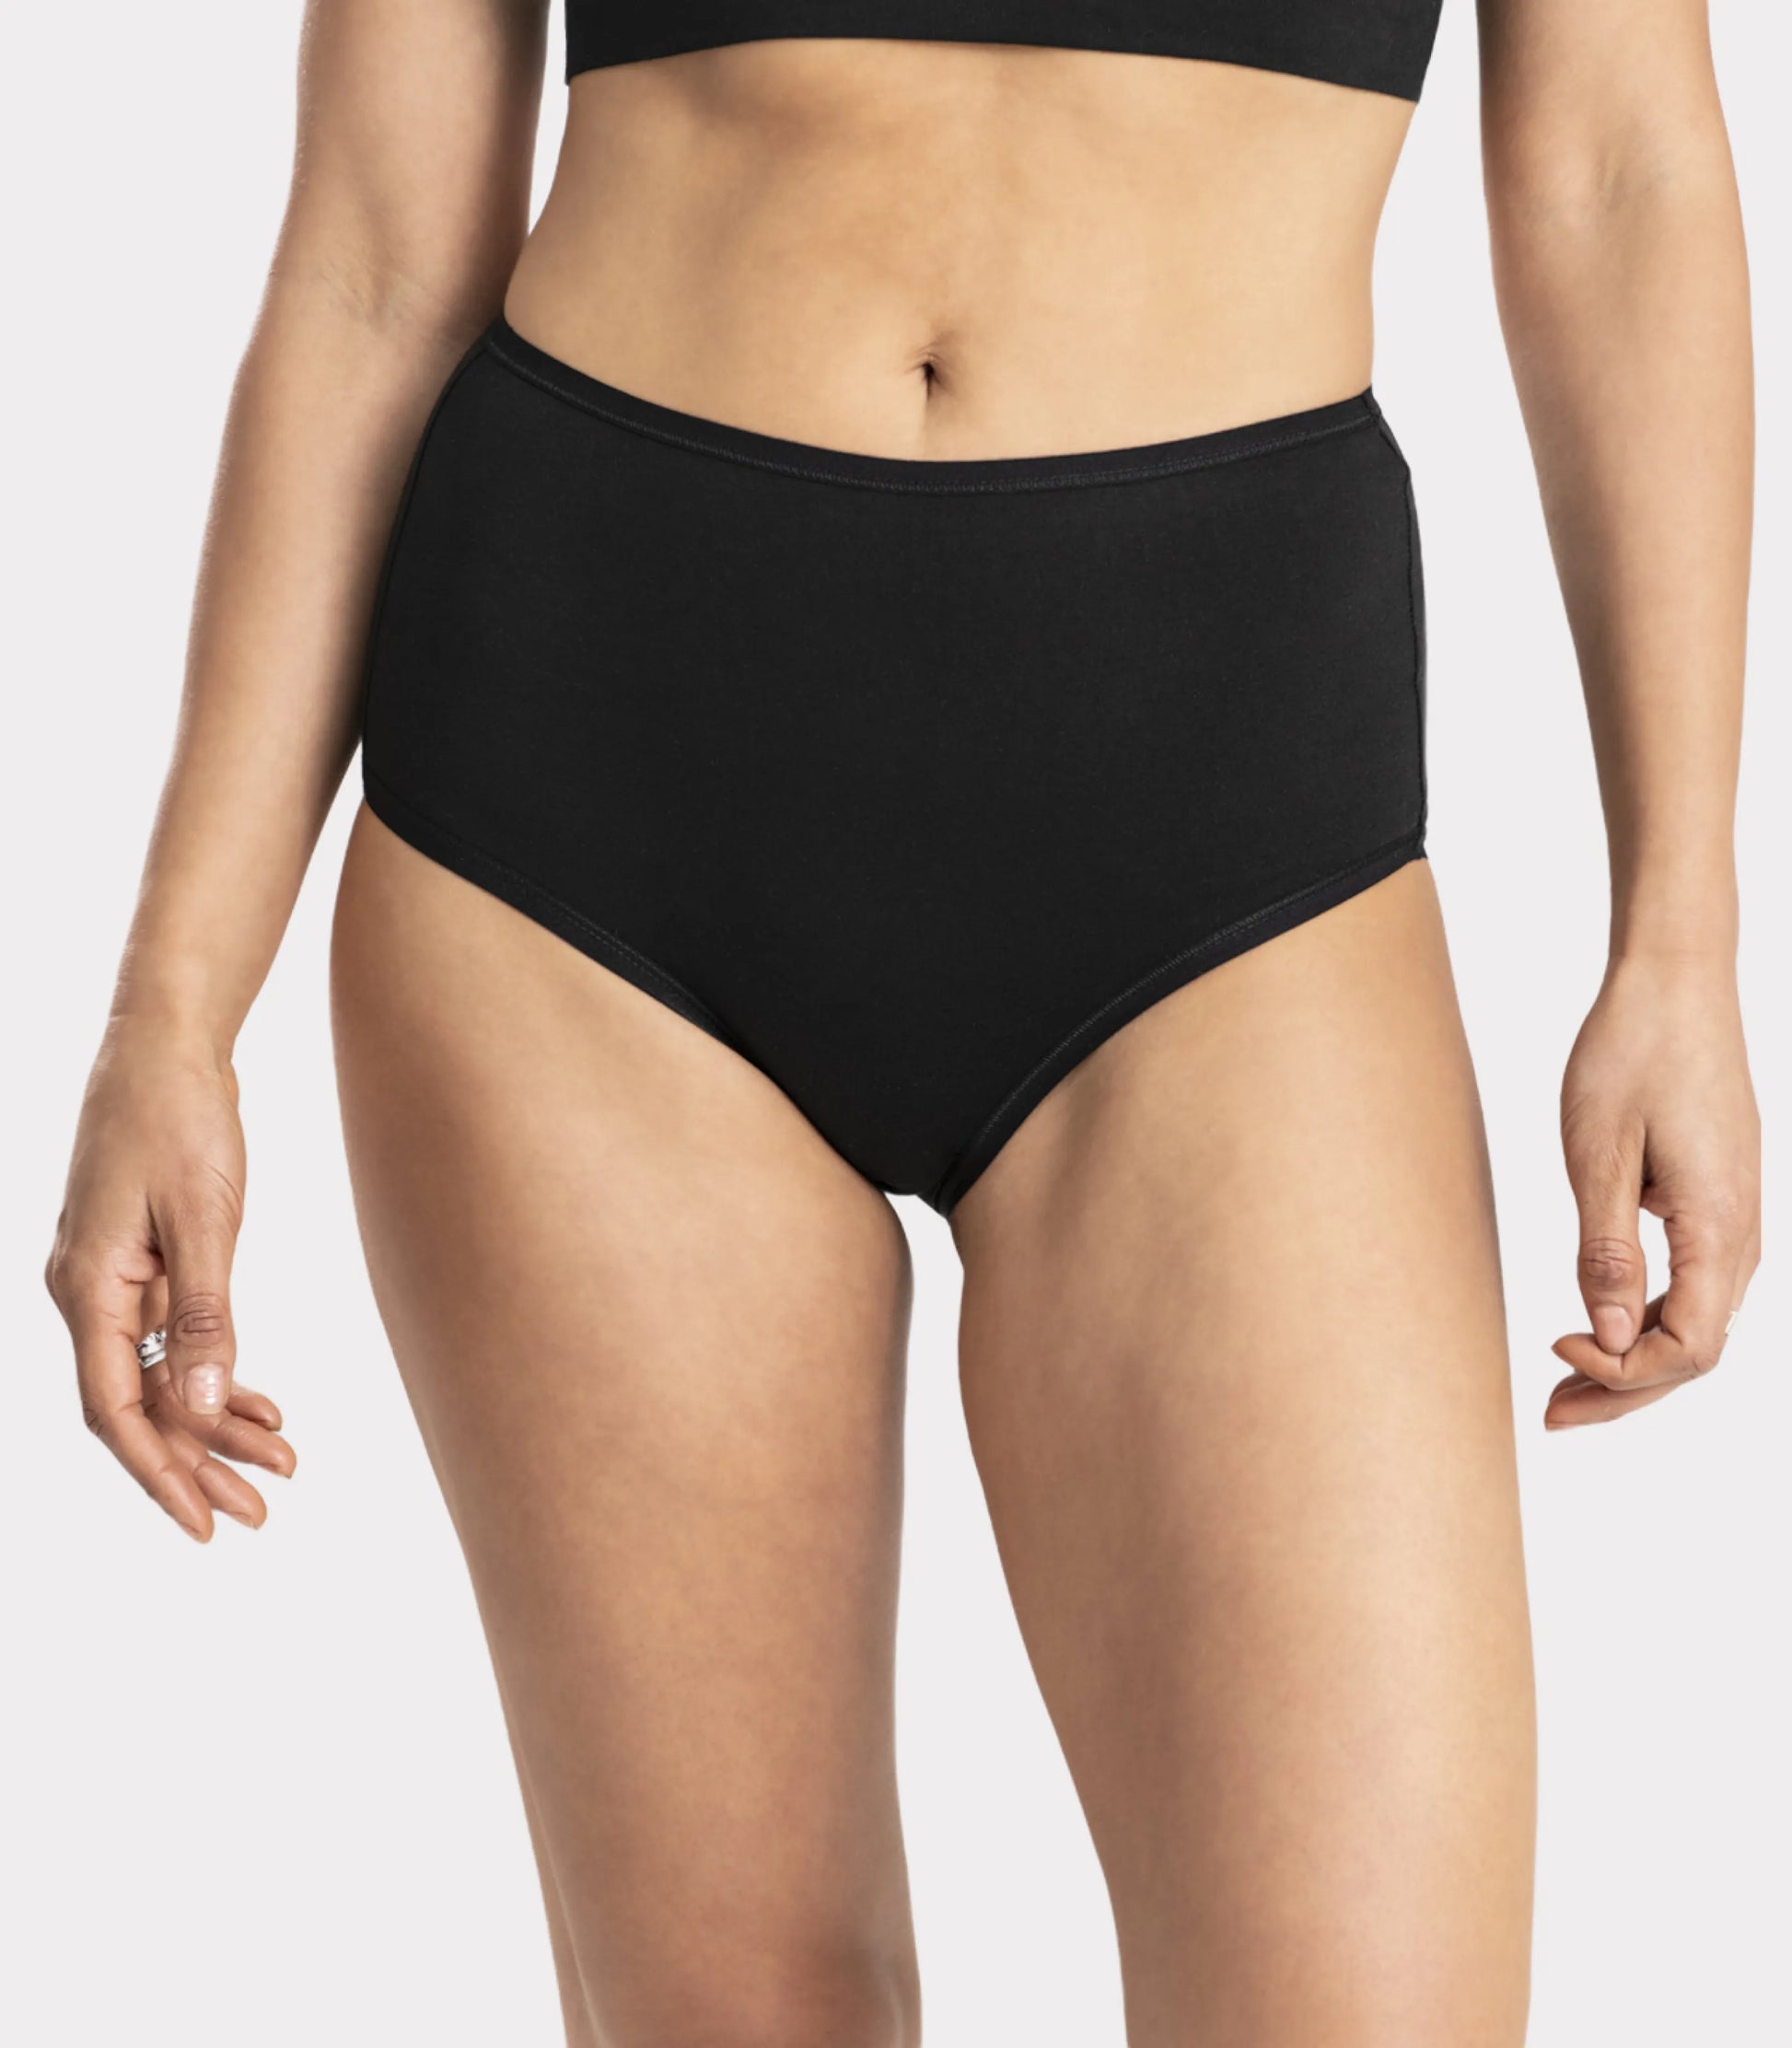 Pack of 2 pairs of Pur Coton midi knickers in black